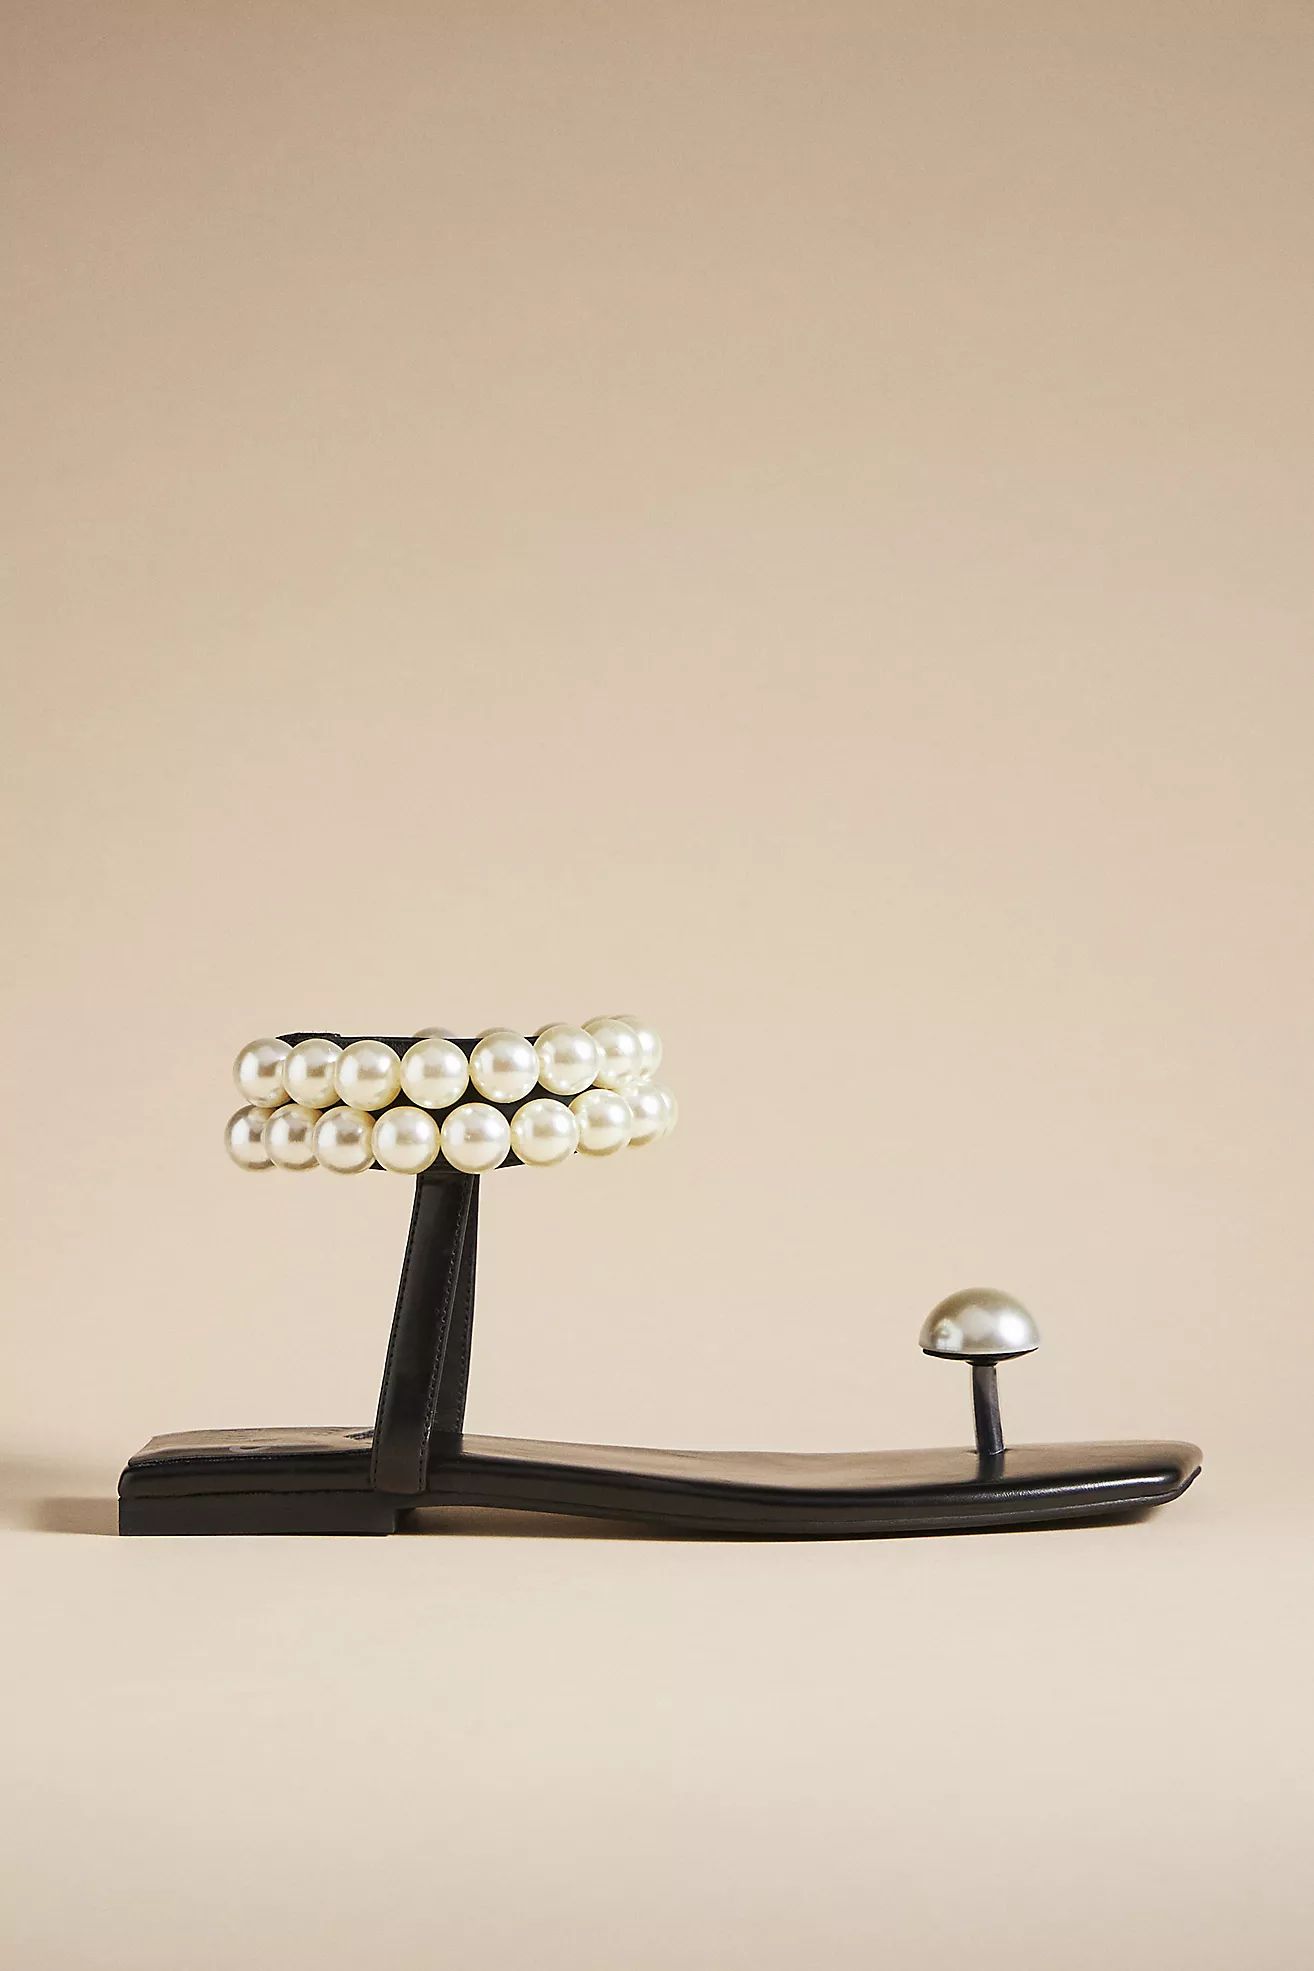 Jeffrey Campbell Chateau-2 Pearl Sandals | Anthropologie (US)